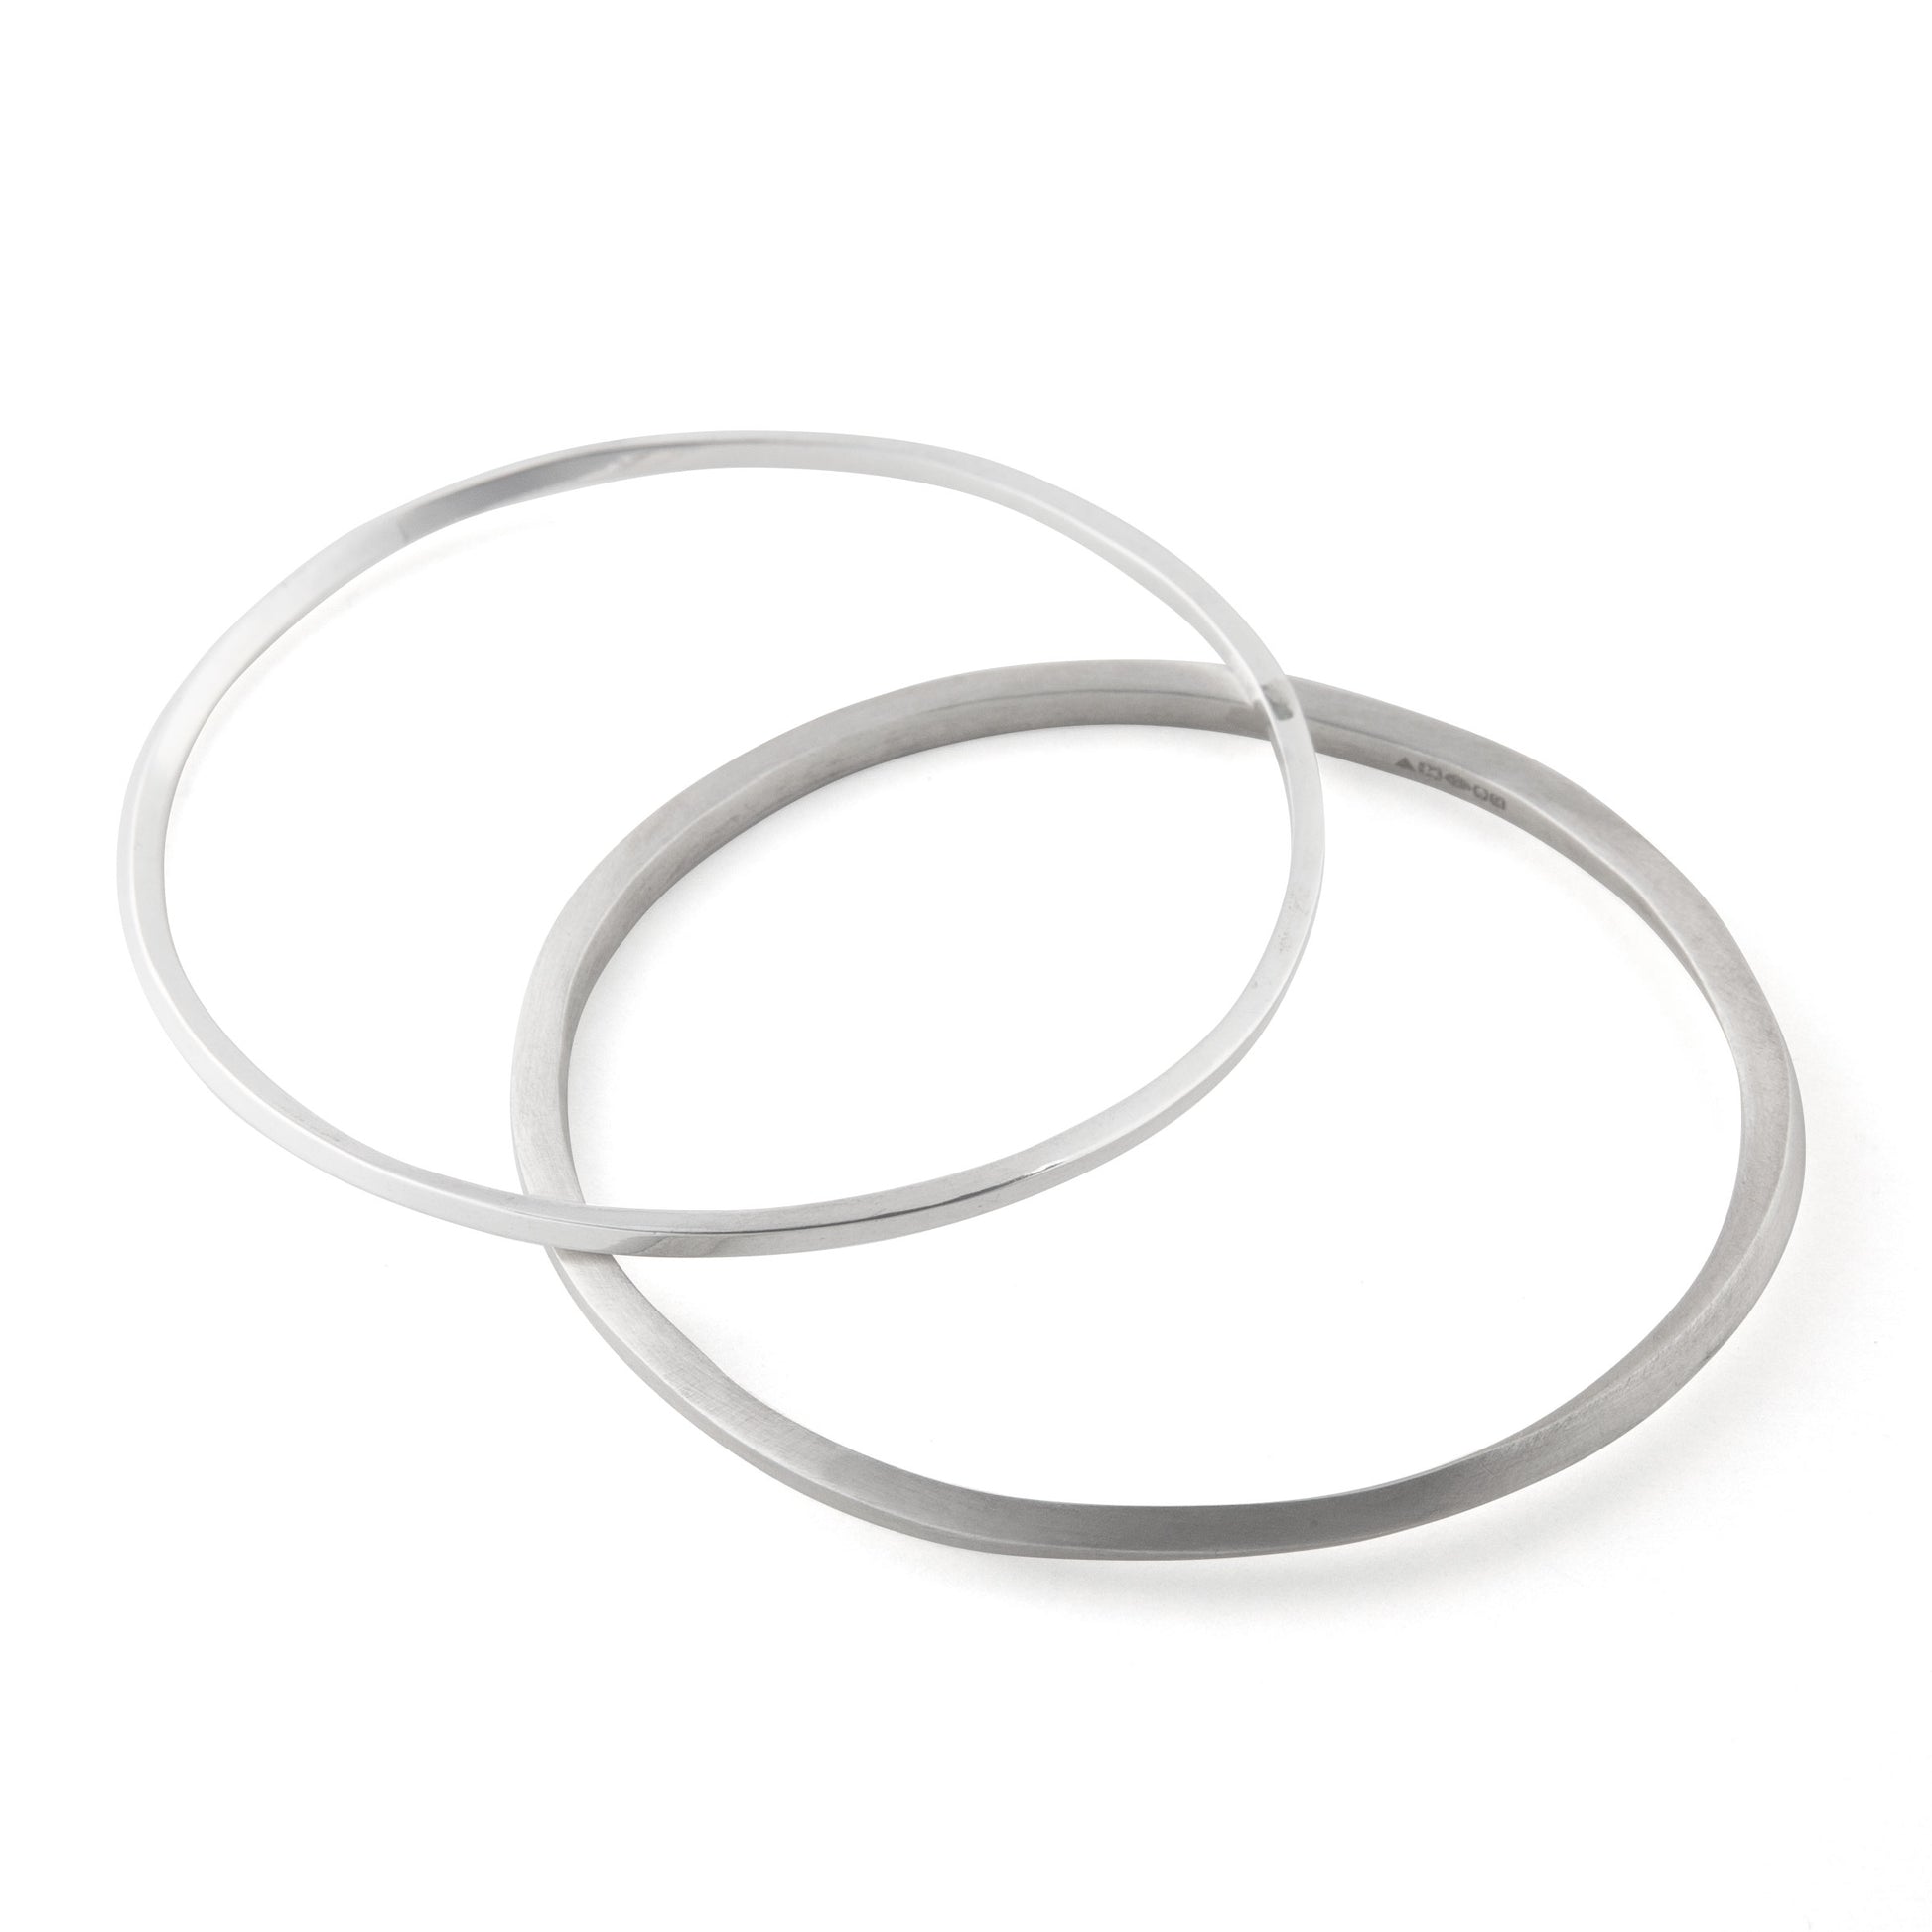 Square Twist Silver Bangles in 2mm and 3mm thickness 